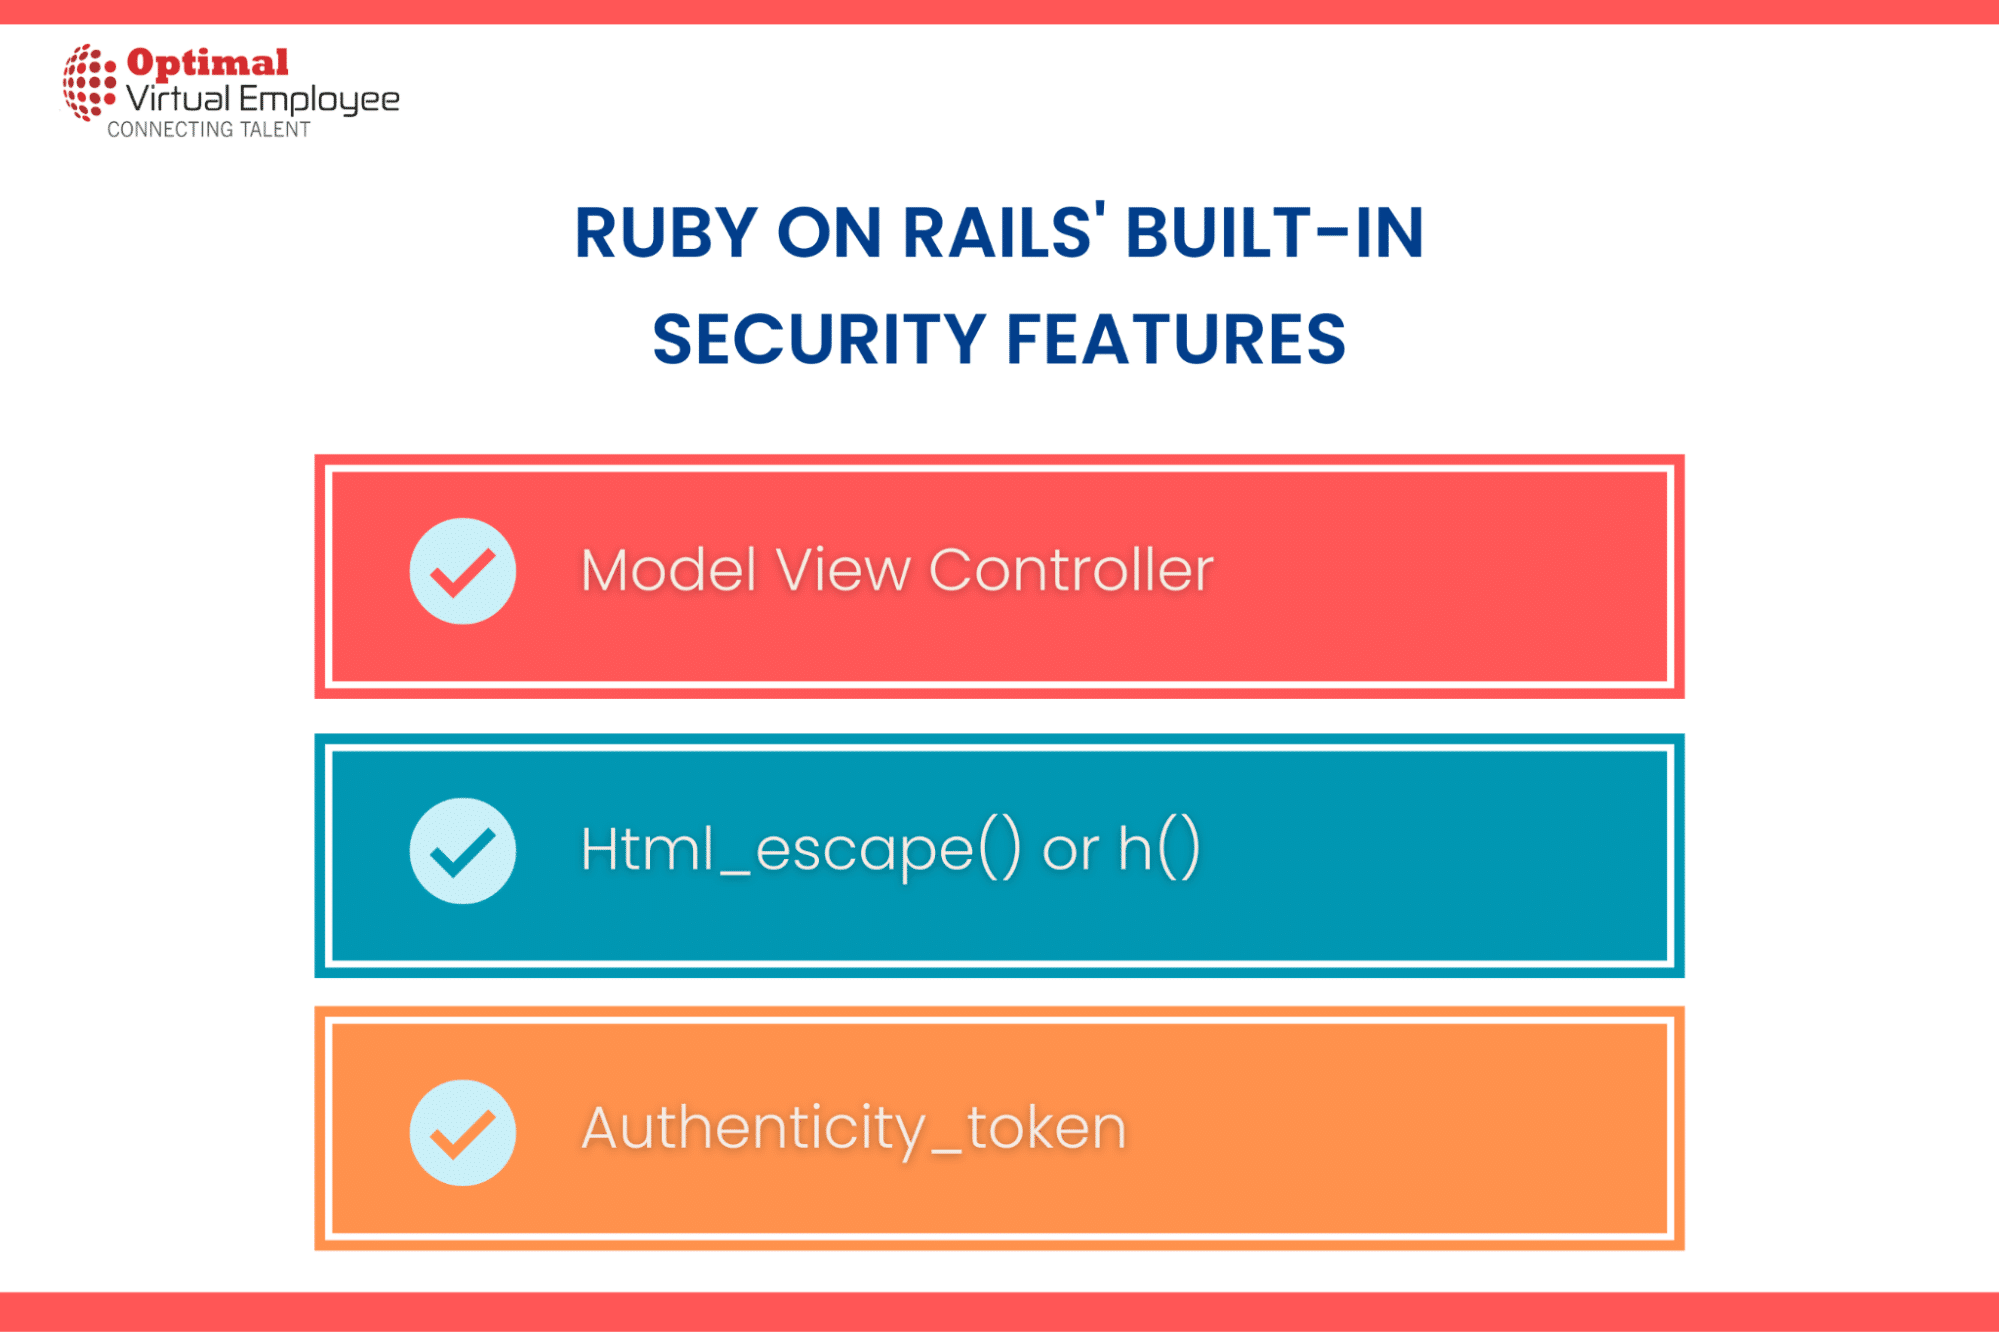 Ruby on Rails' built-in security features